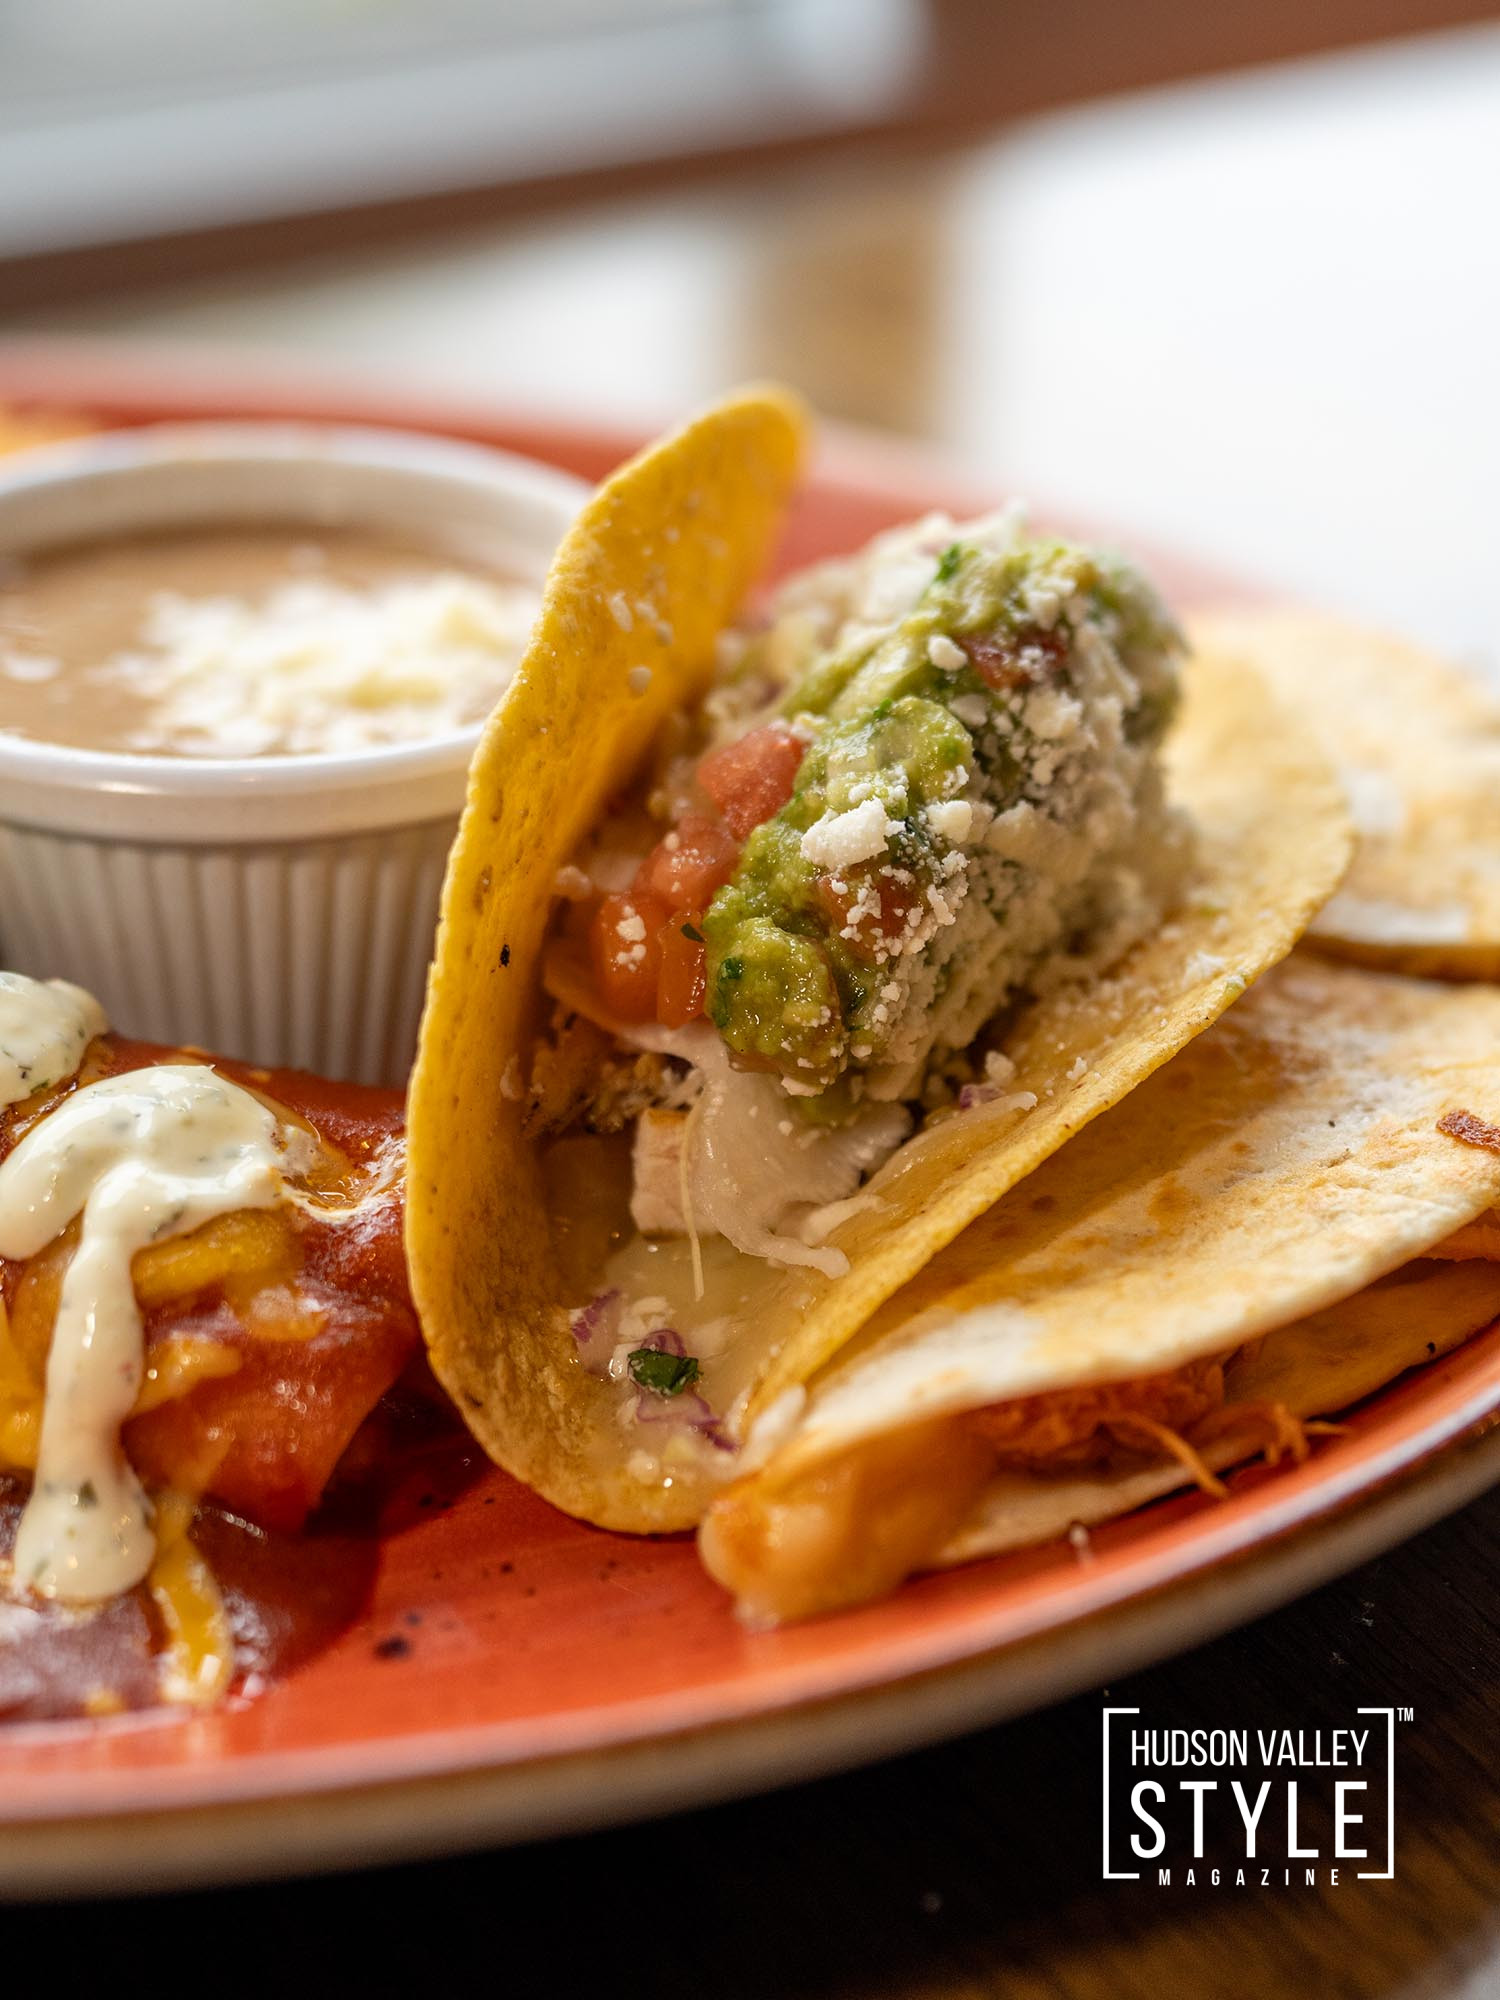 Savor the Spice of Life at Monarca Cantina: A Zesty Fiesta of Flavors in Monroe, NY – Hudson Valley Restaurant Reviews with Hospitality Photographer Maxwell Alexander – Presented by Alluvion Vacations